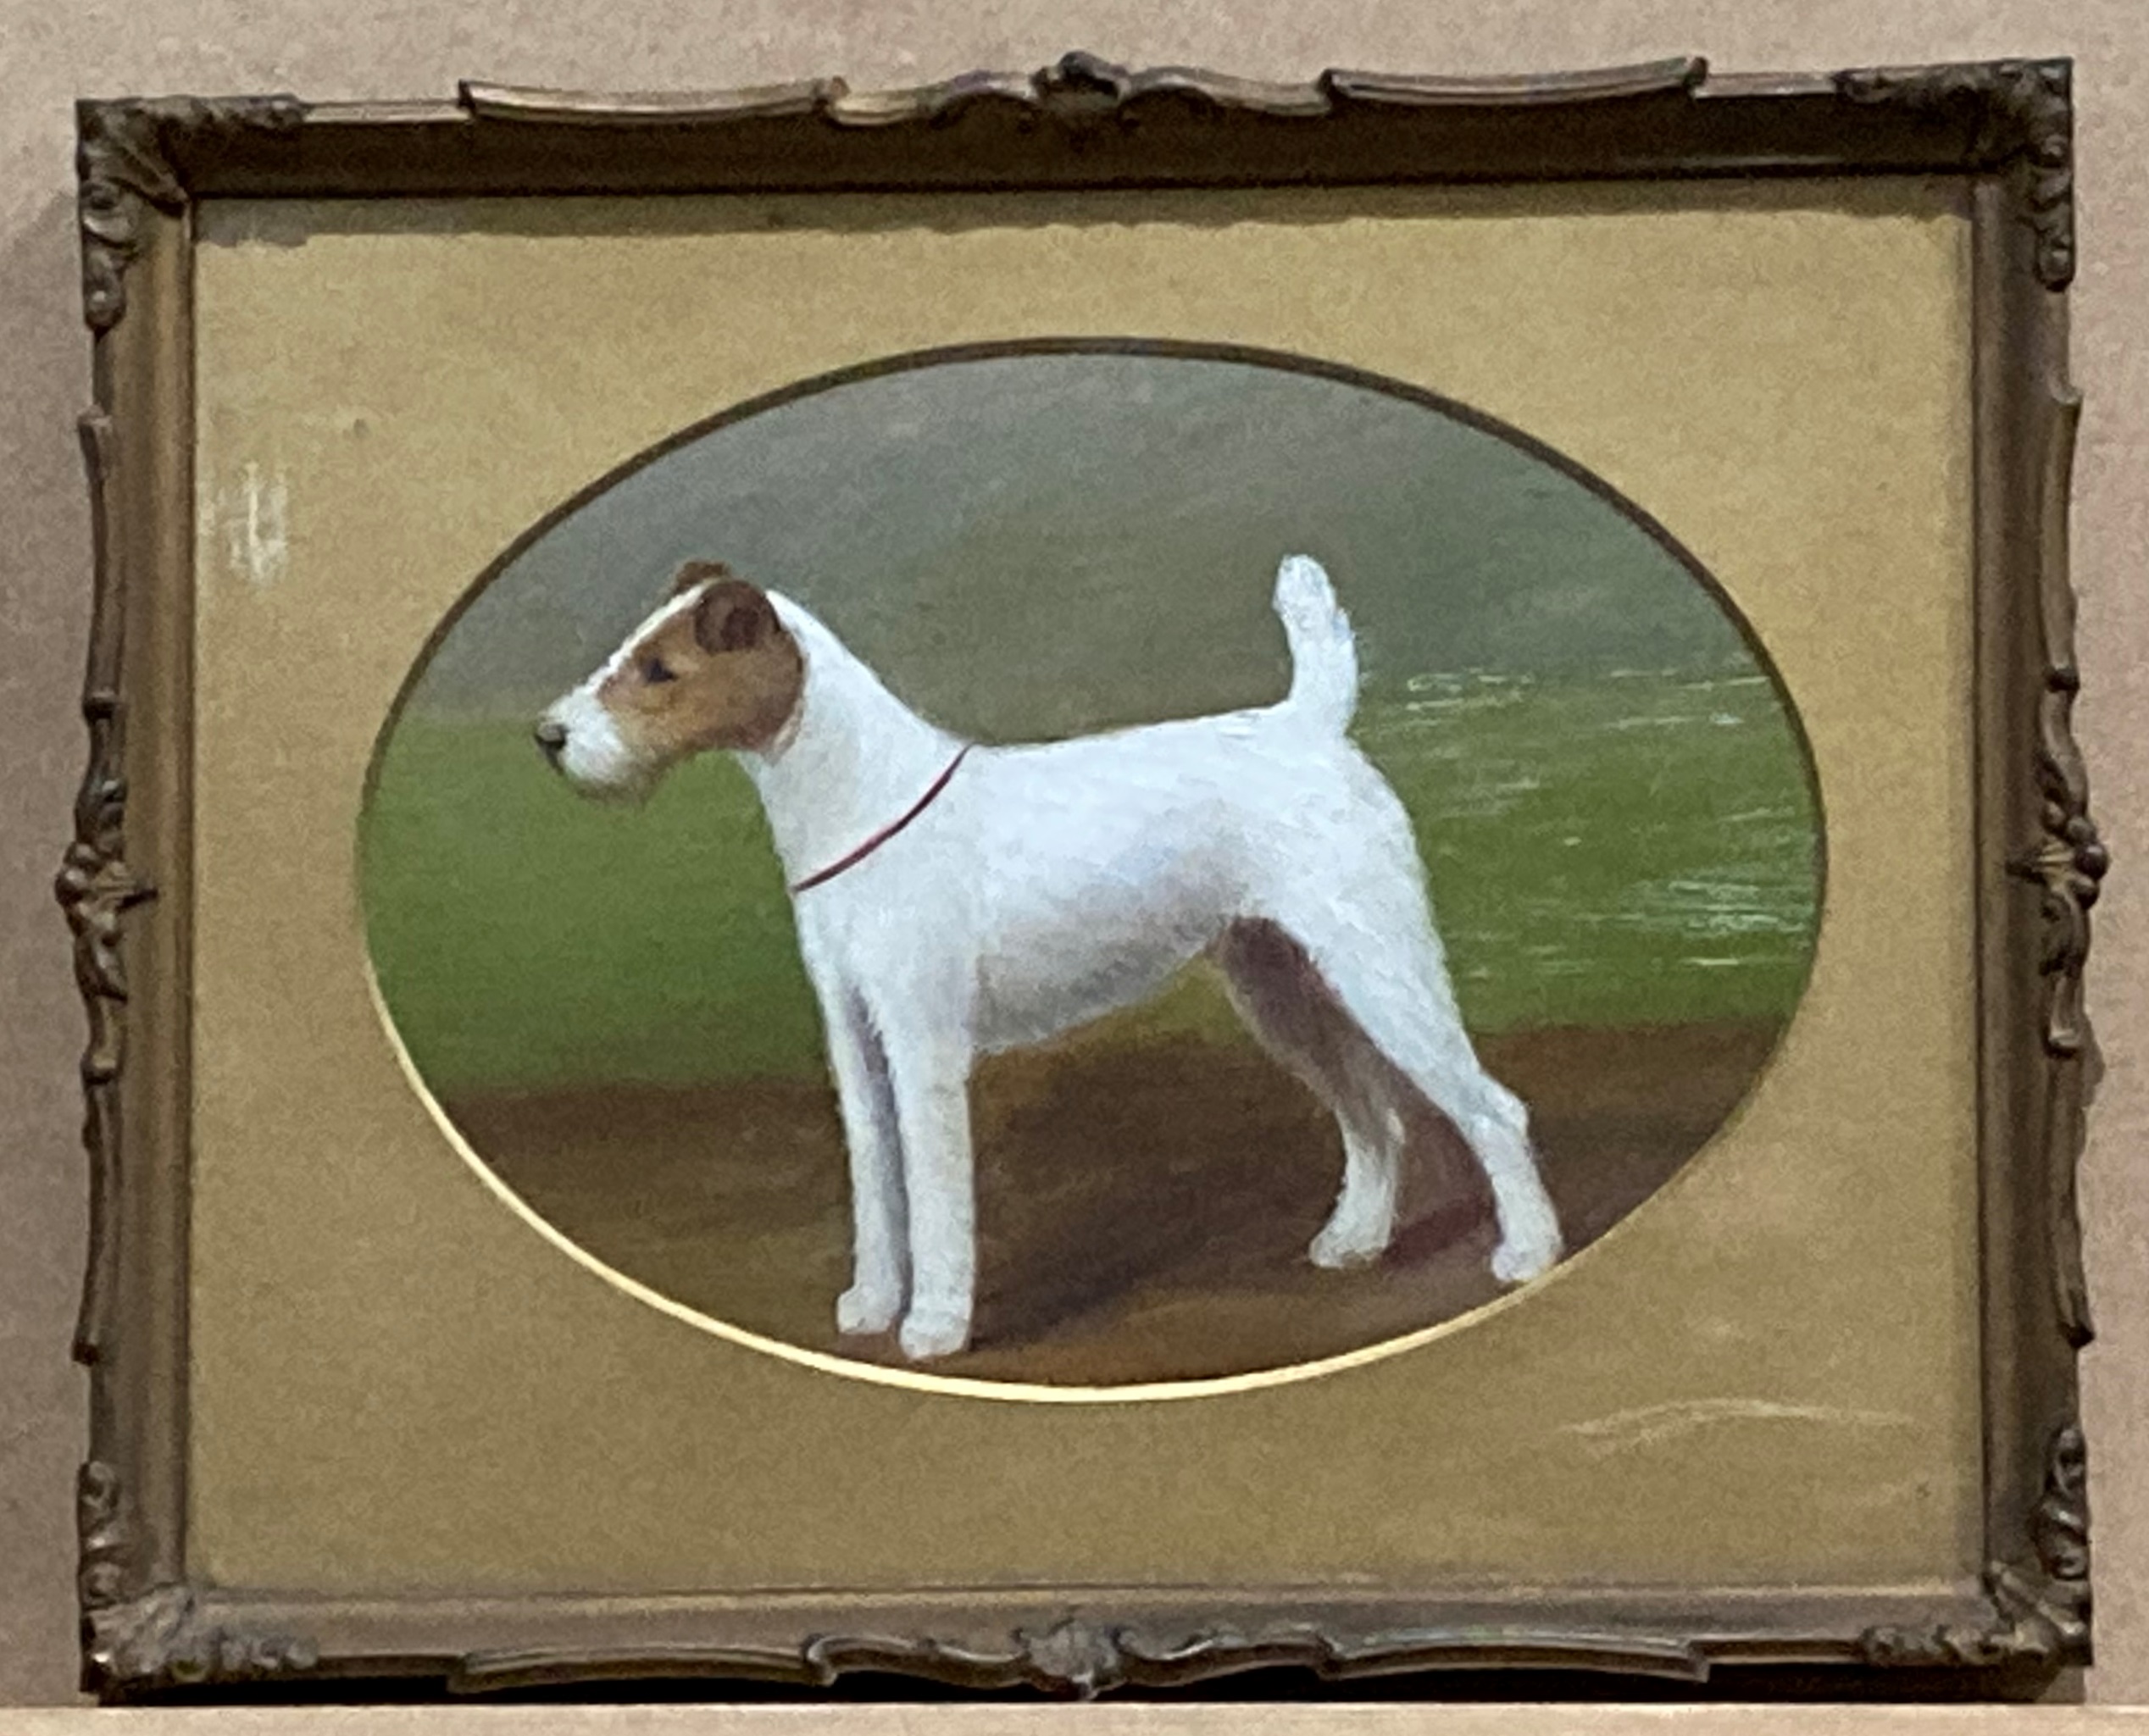 H Crowther 1923, 'Stapenhill Wiregirls Legacy', study of a fox terrier, oil on canvas, - Image 9 of 32